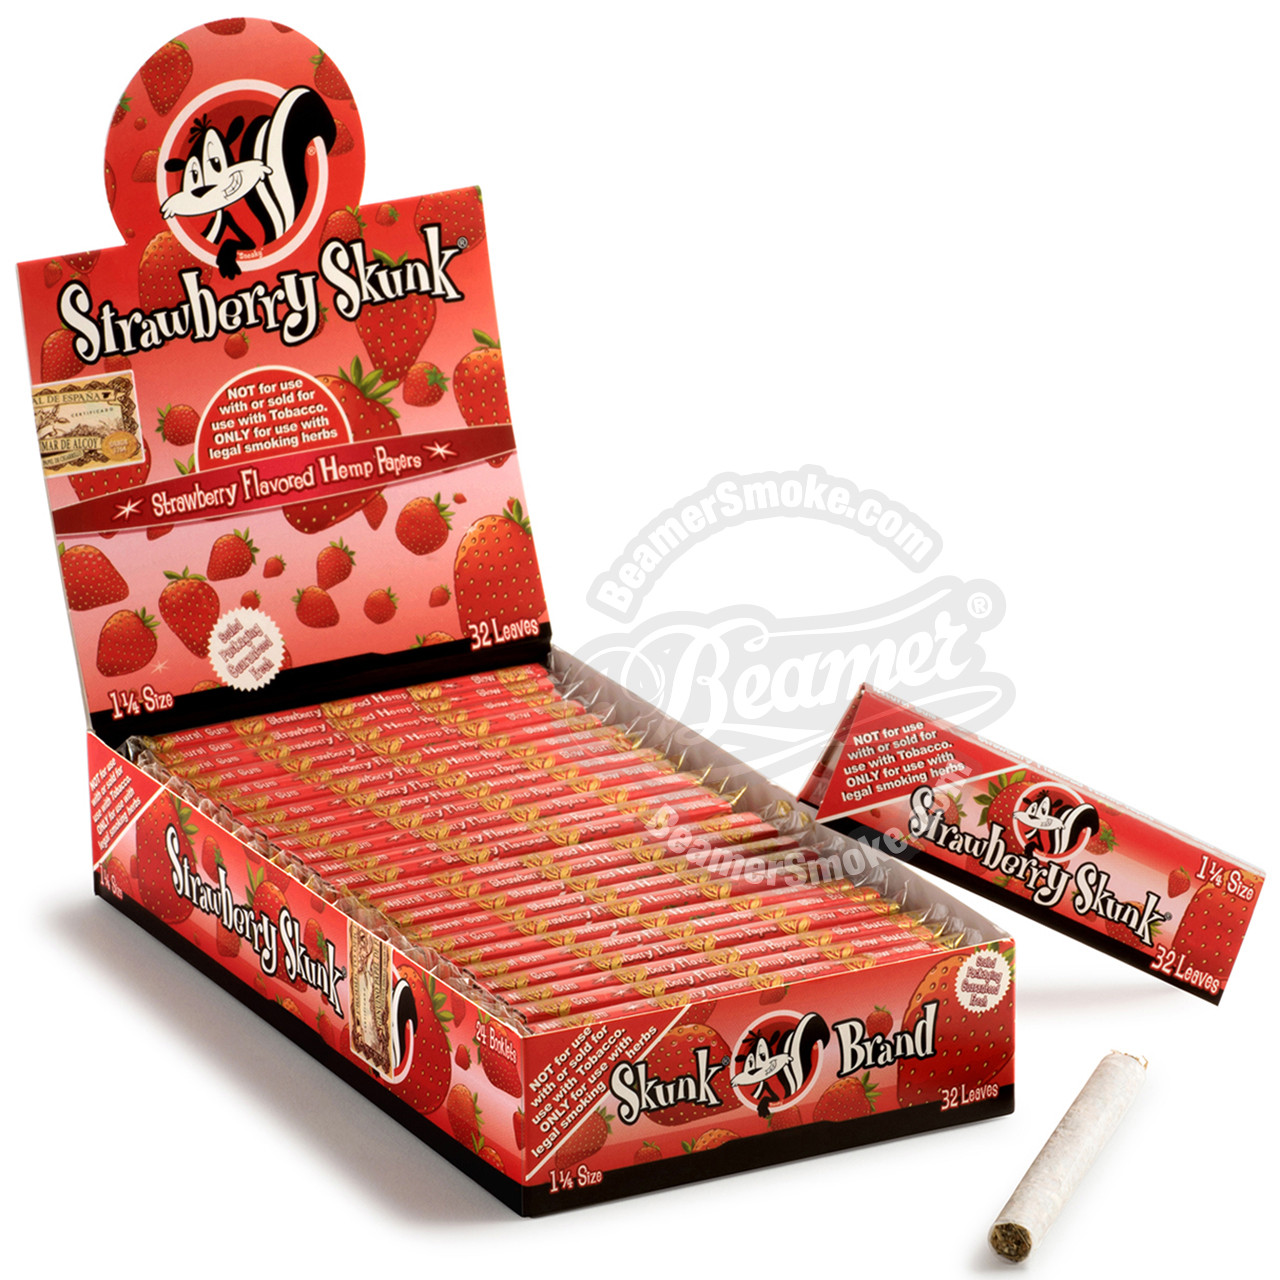 Strawberry Flavor Skunk Rolling Papers - 1 1/4 Size